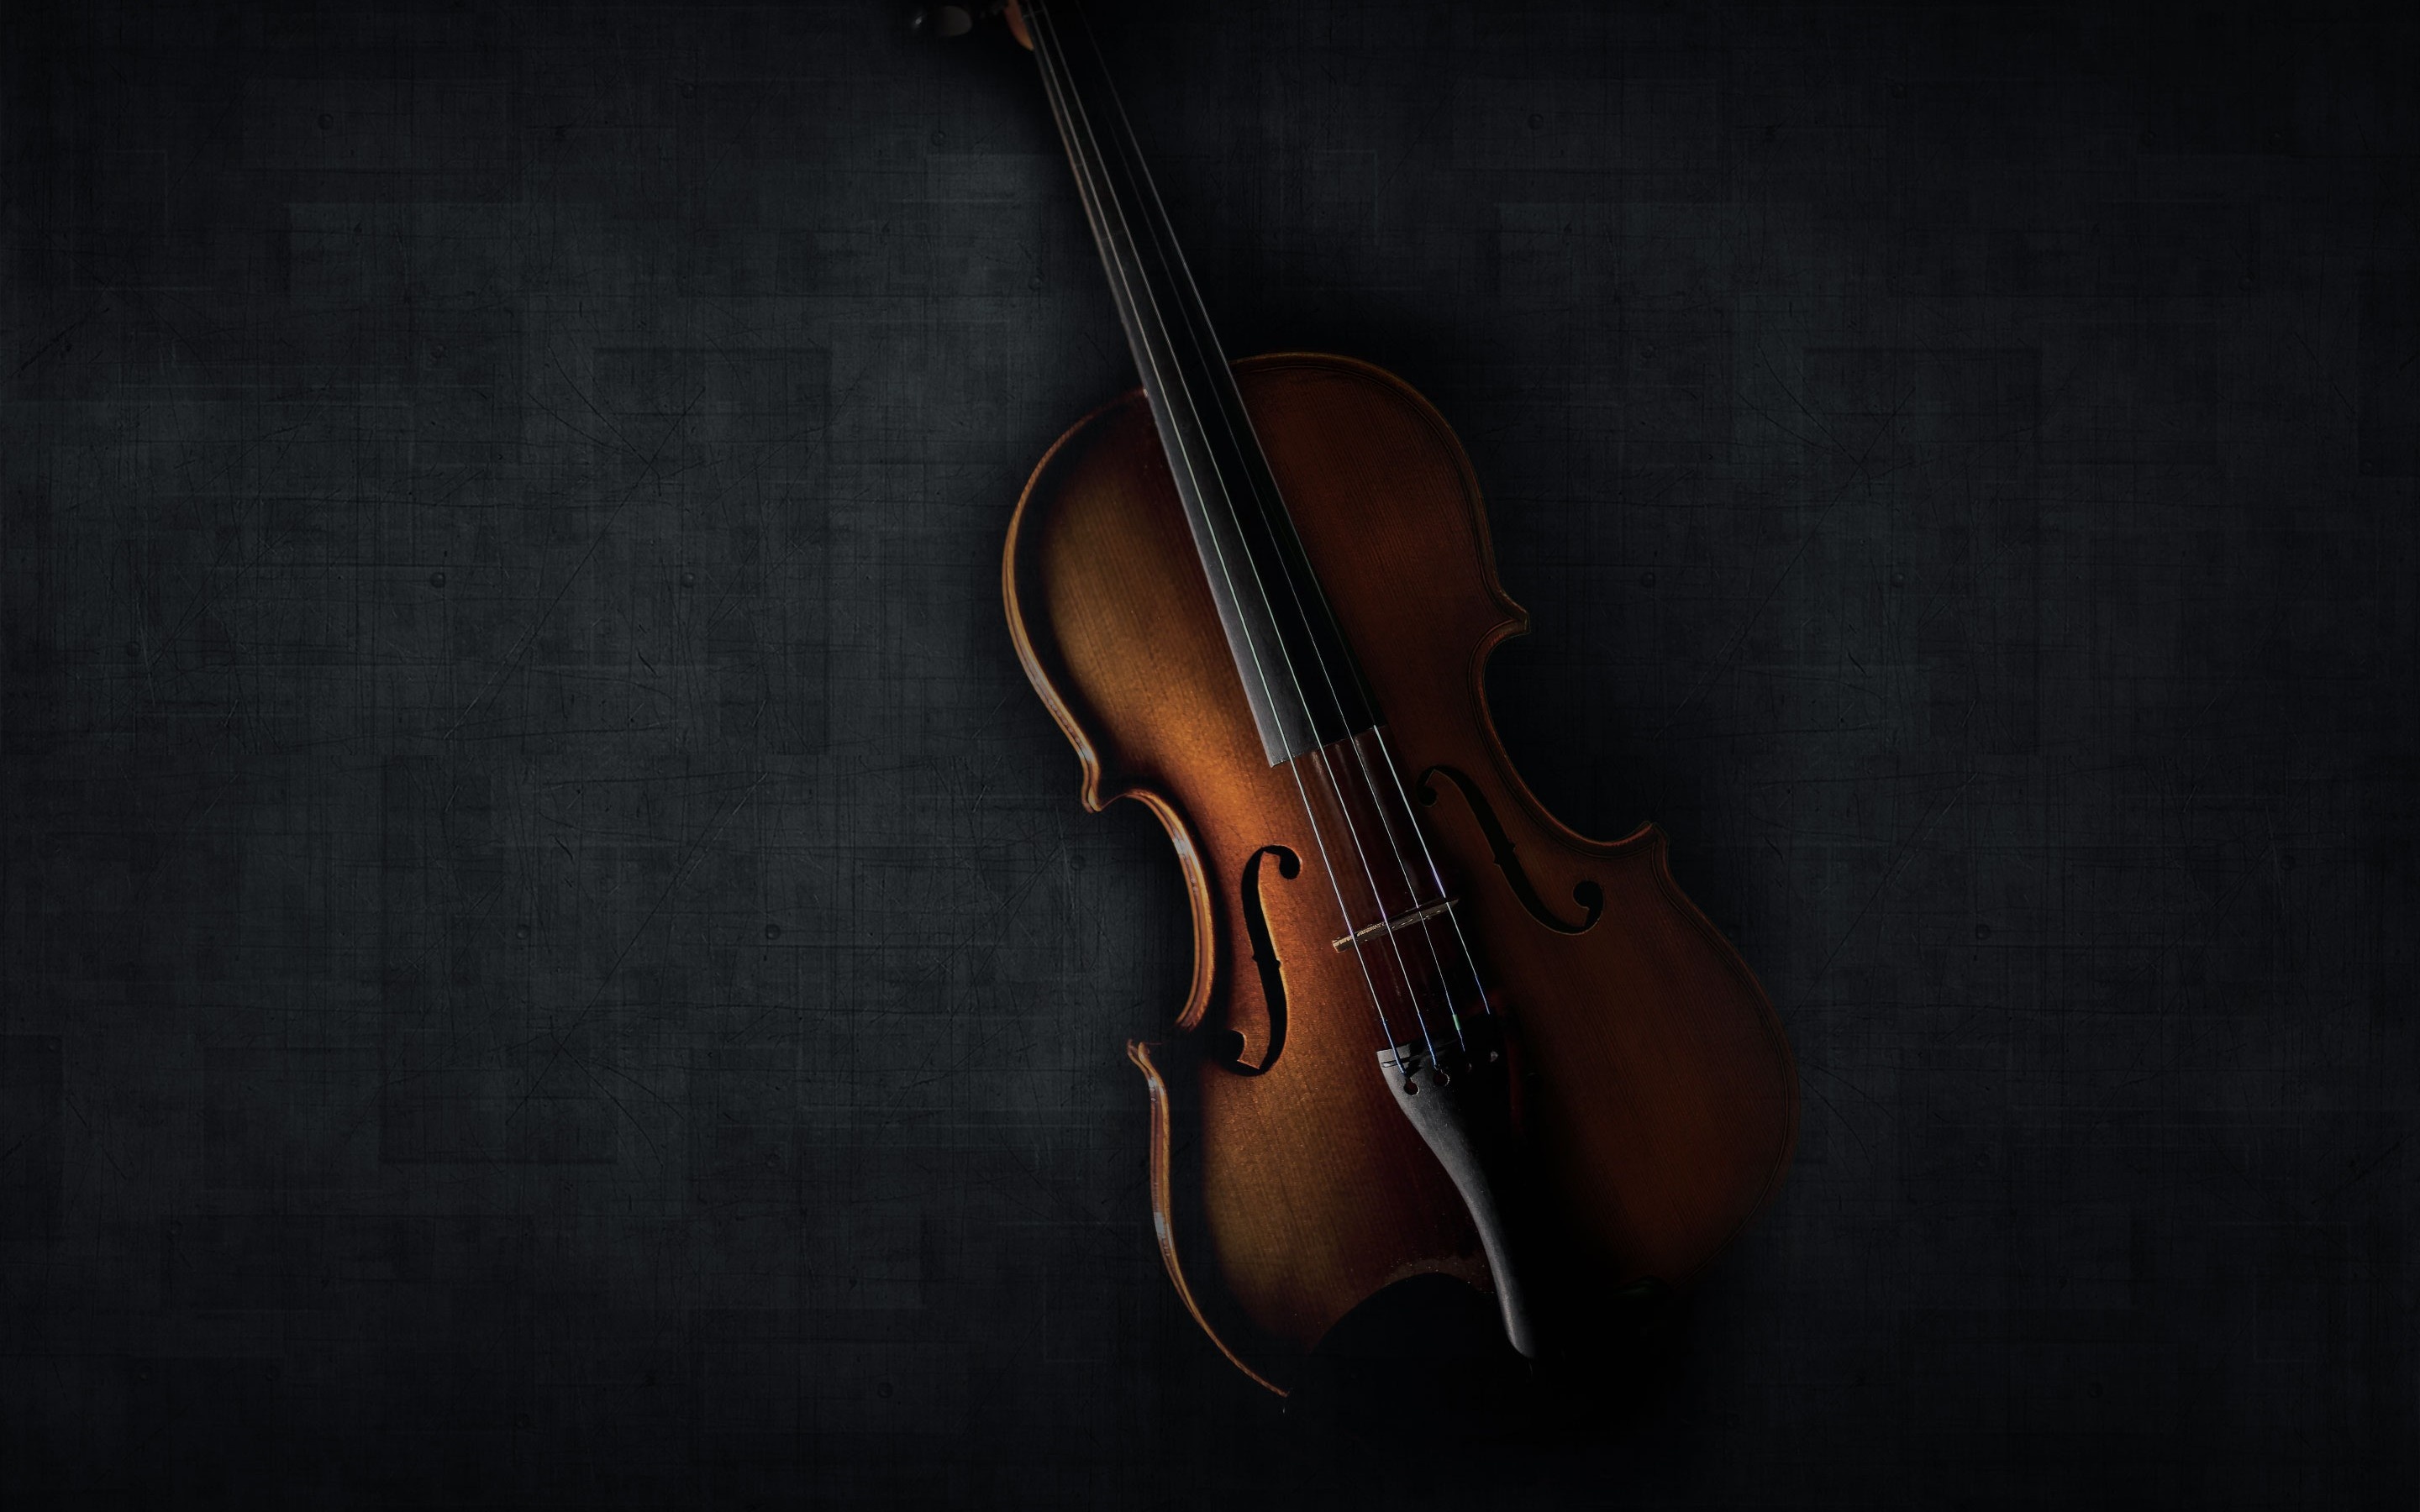 Violin: Spruce Belly, Maple Ribs And Back, A Soundpost, A Hollow Wooden Body. 2880x1800 HD Wallpaper.